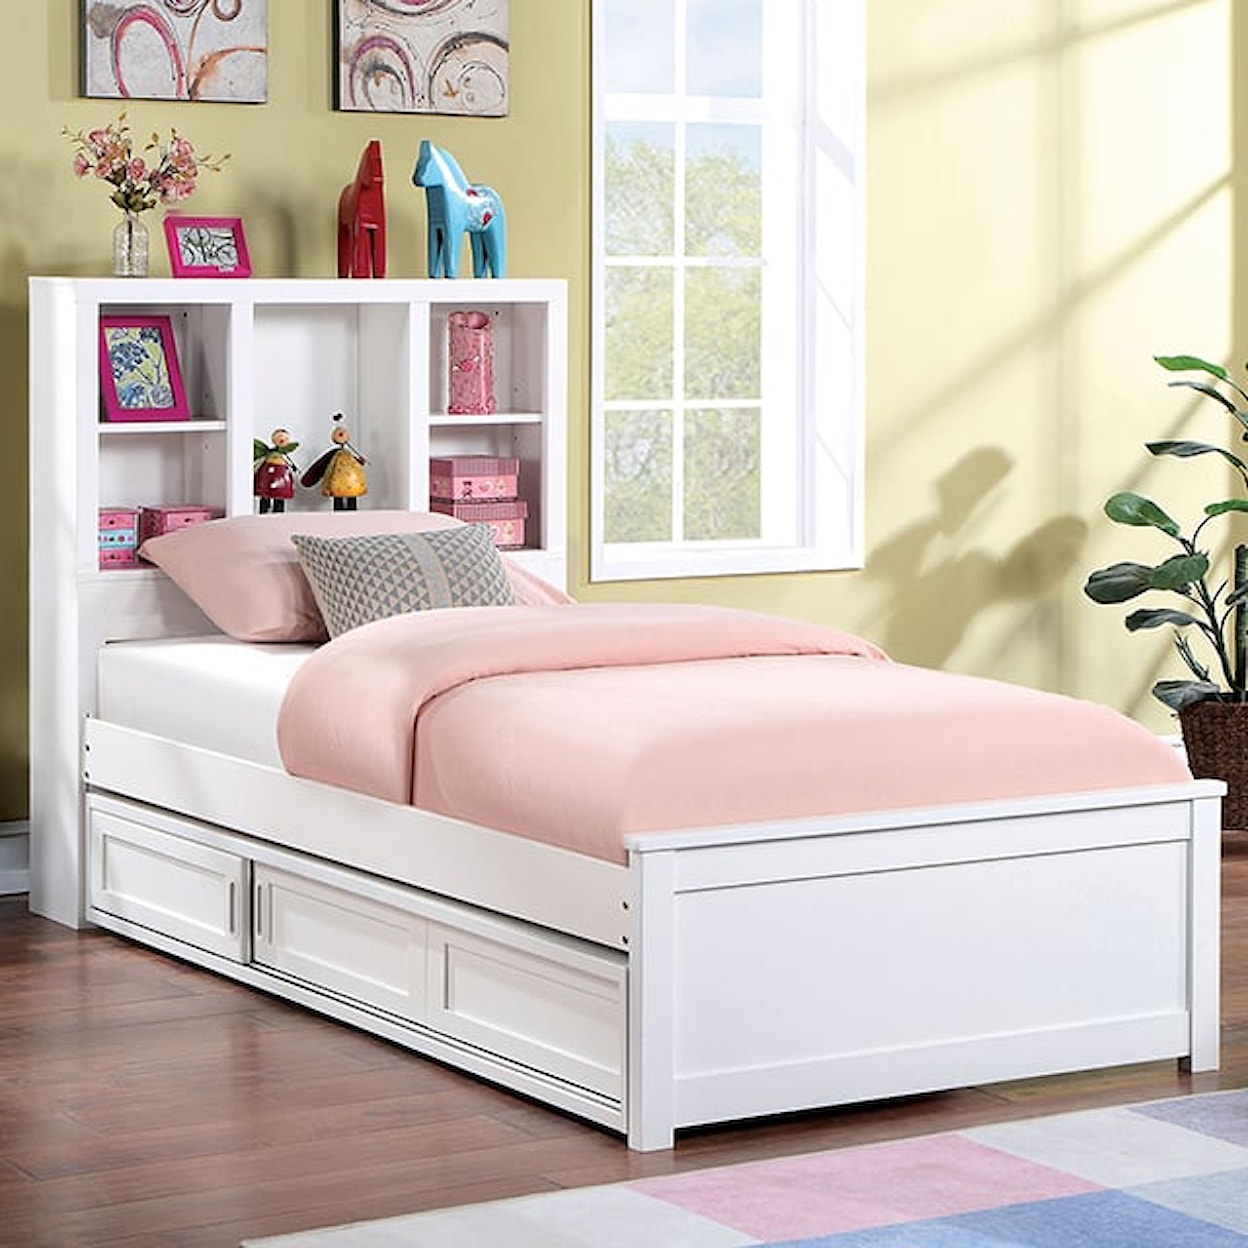 Furniture of America - FOA Marilla Youth Full Bed with Bookcase Headboard